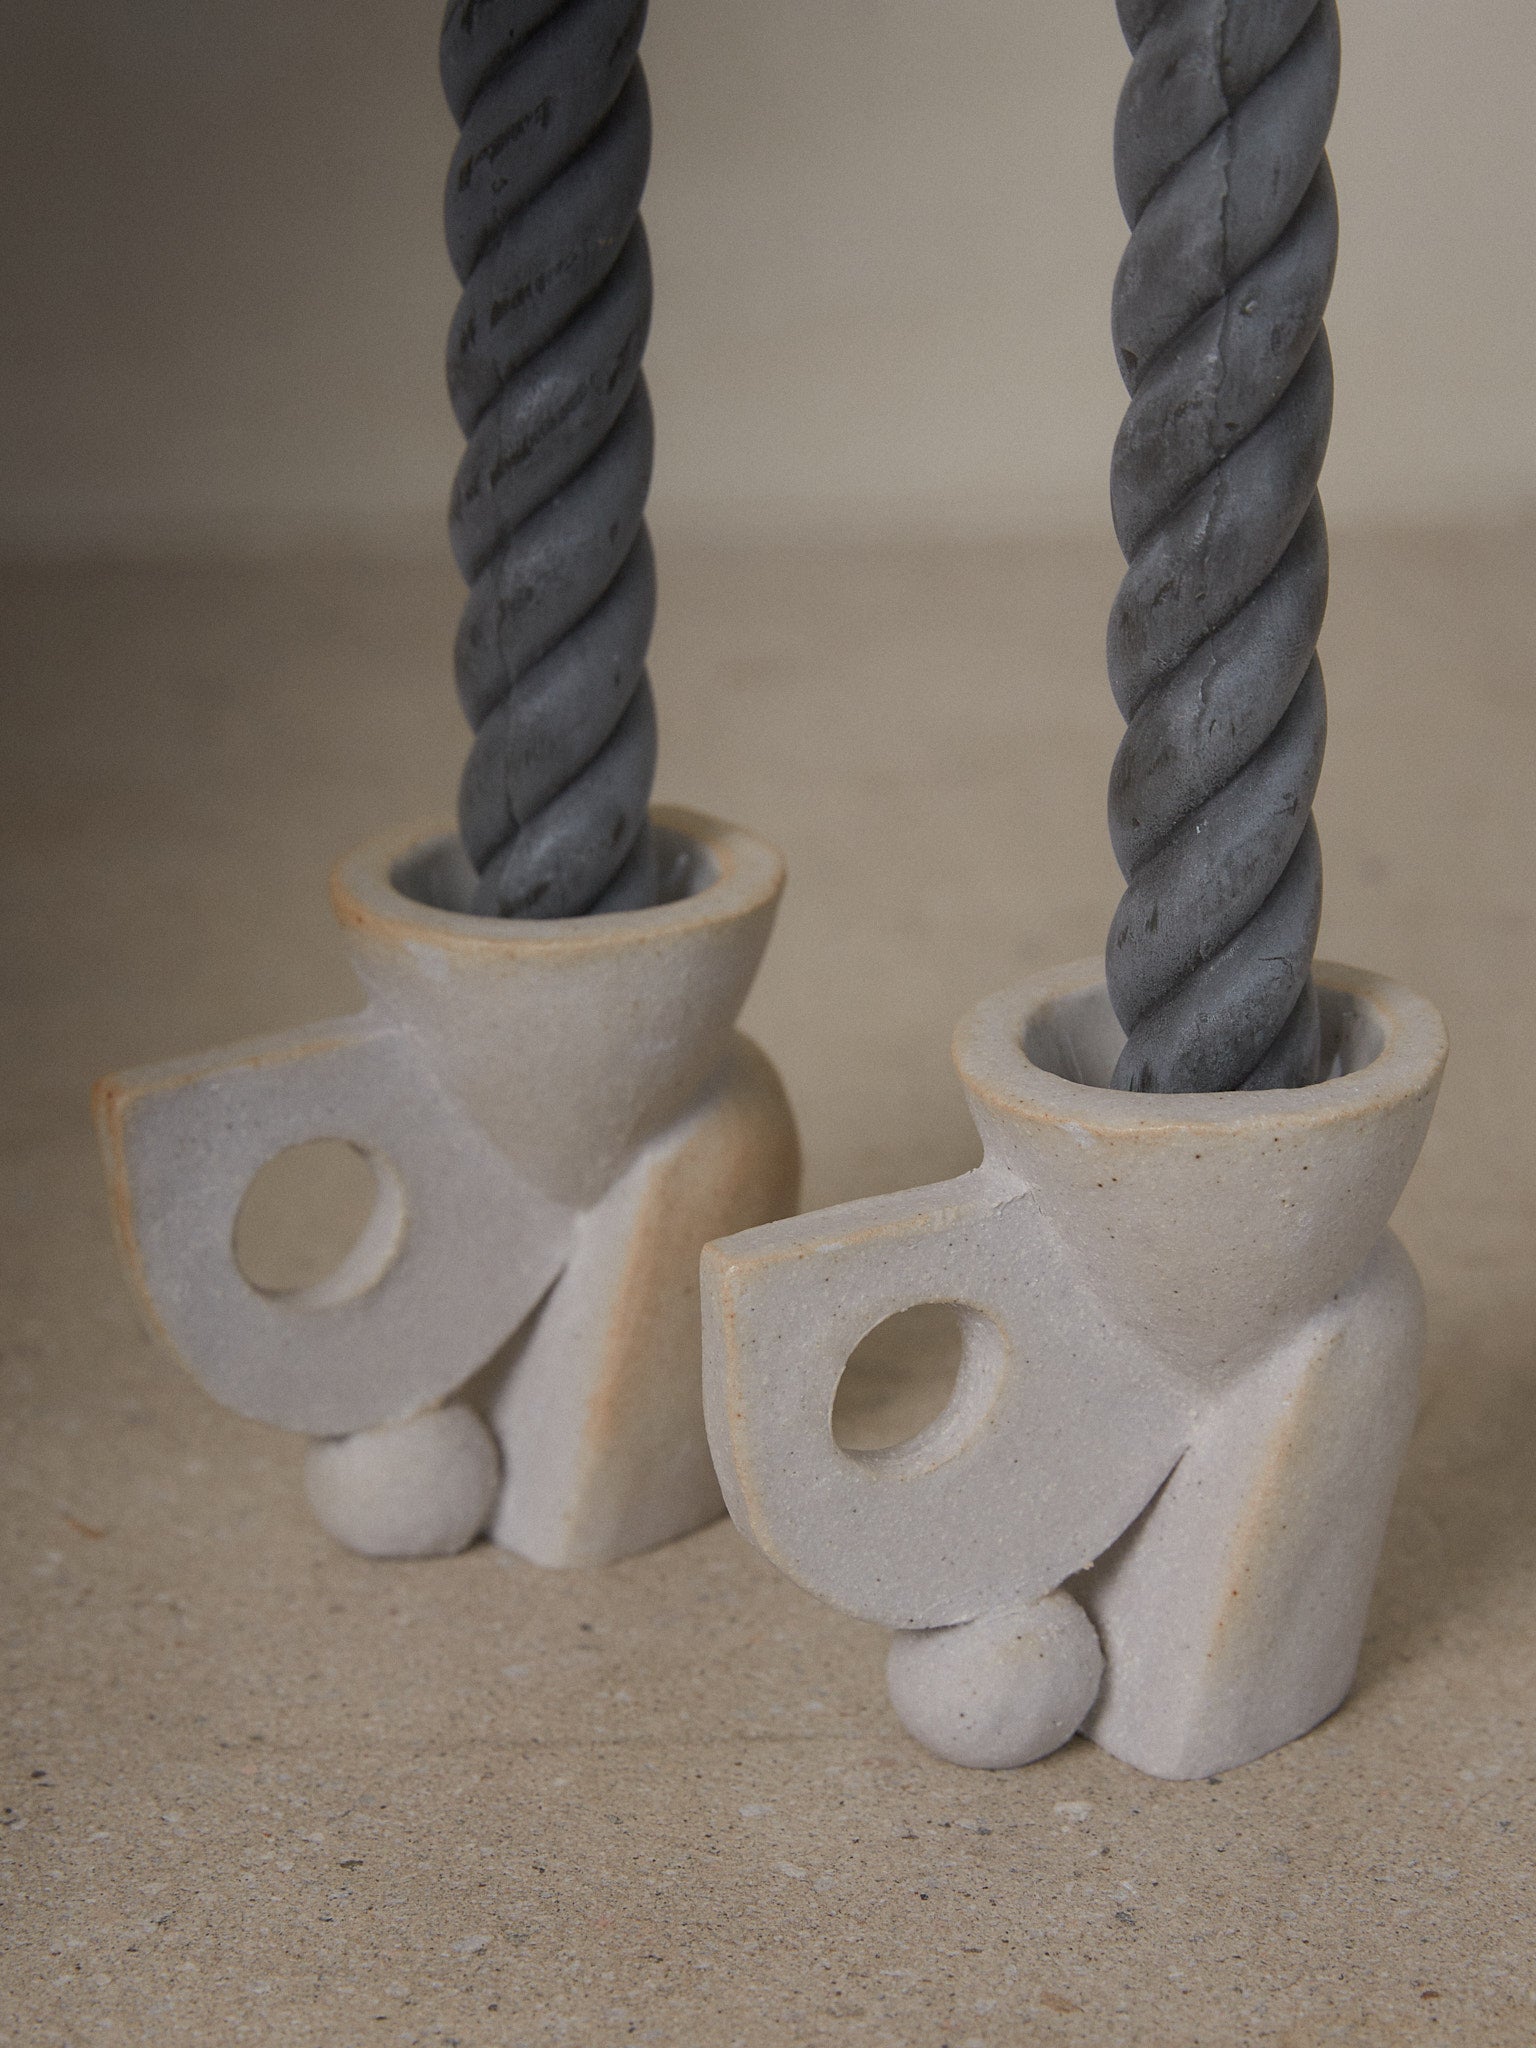 Build Candle Holder Pair. Sculptural abstract candleholders inspired by nature in natural grey ceramic stoneware. 